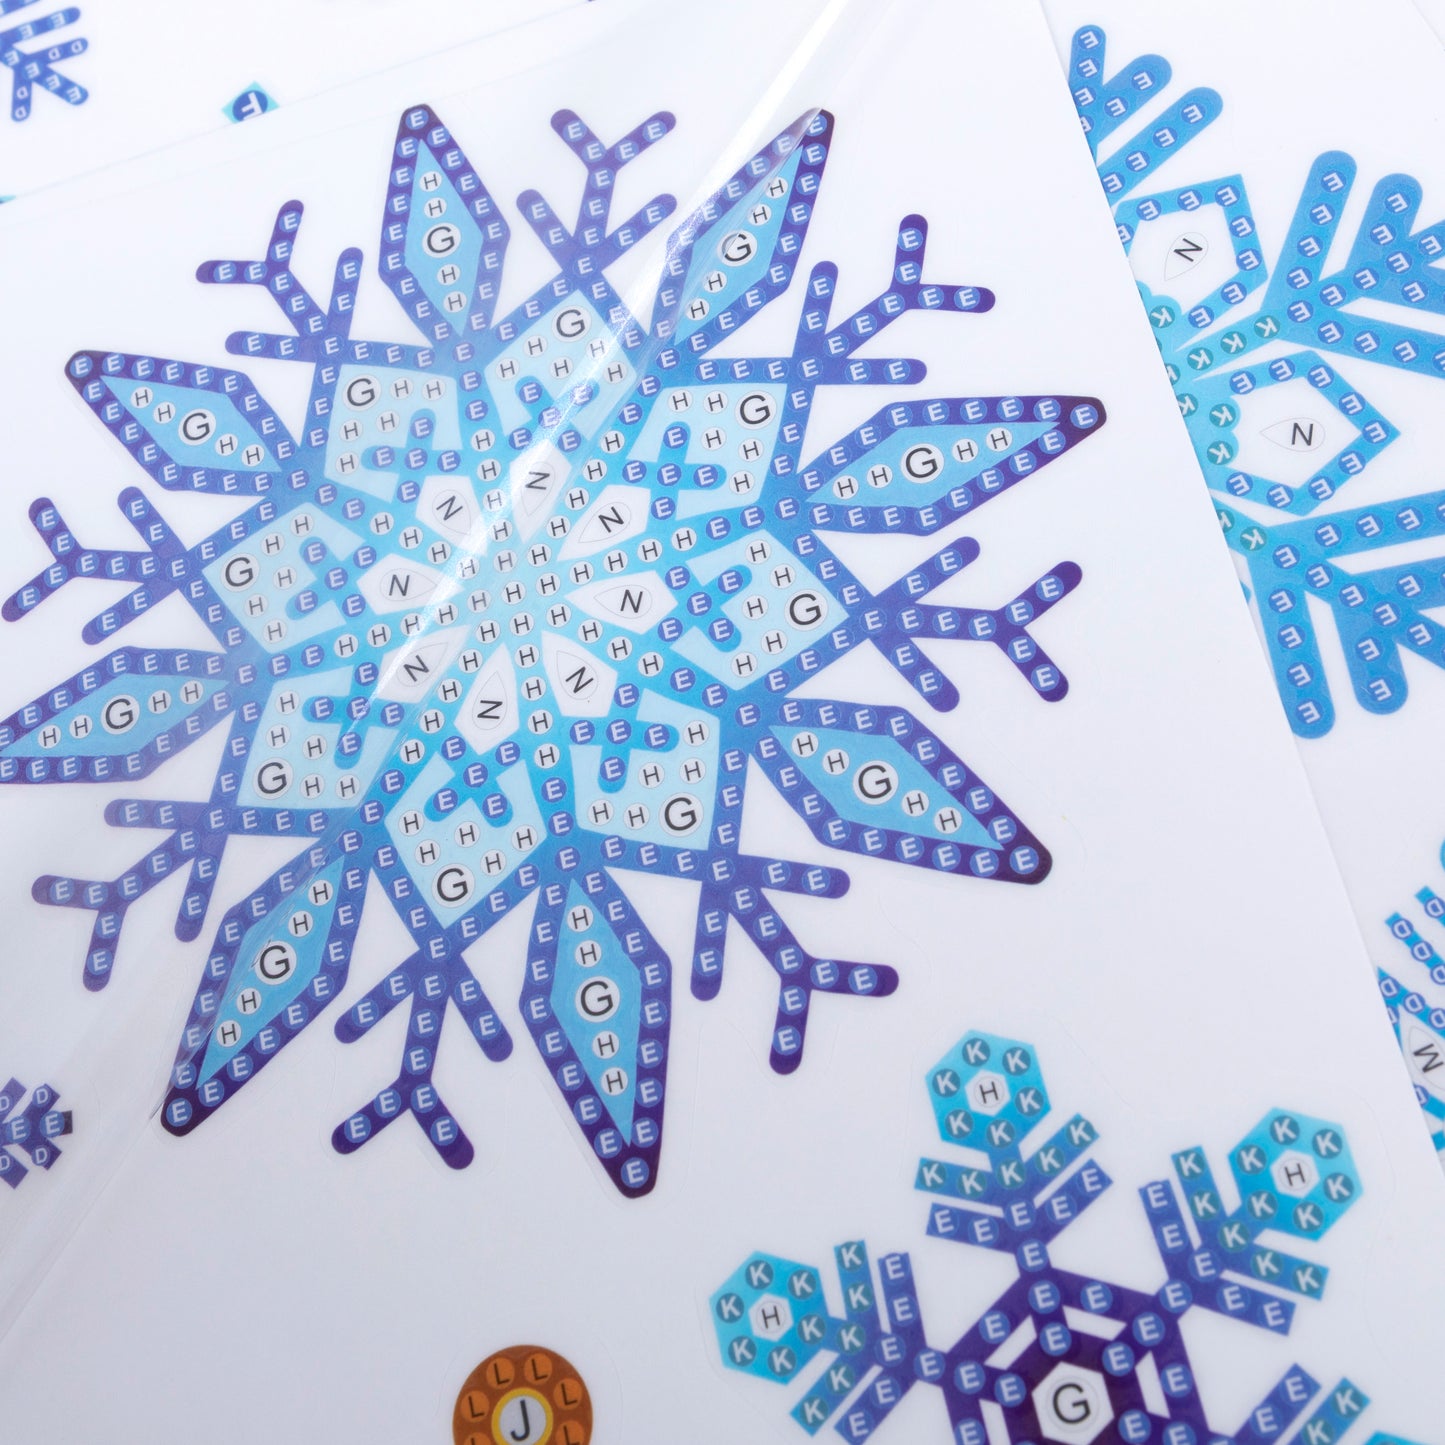 Craft Buddy Crystal Art Wall Stickers Set of 4 - Snowflakes